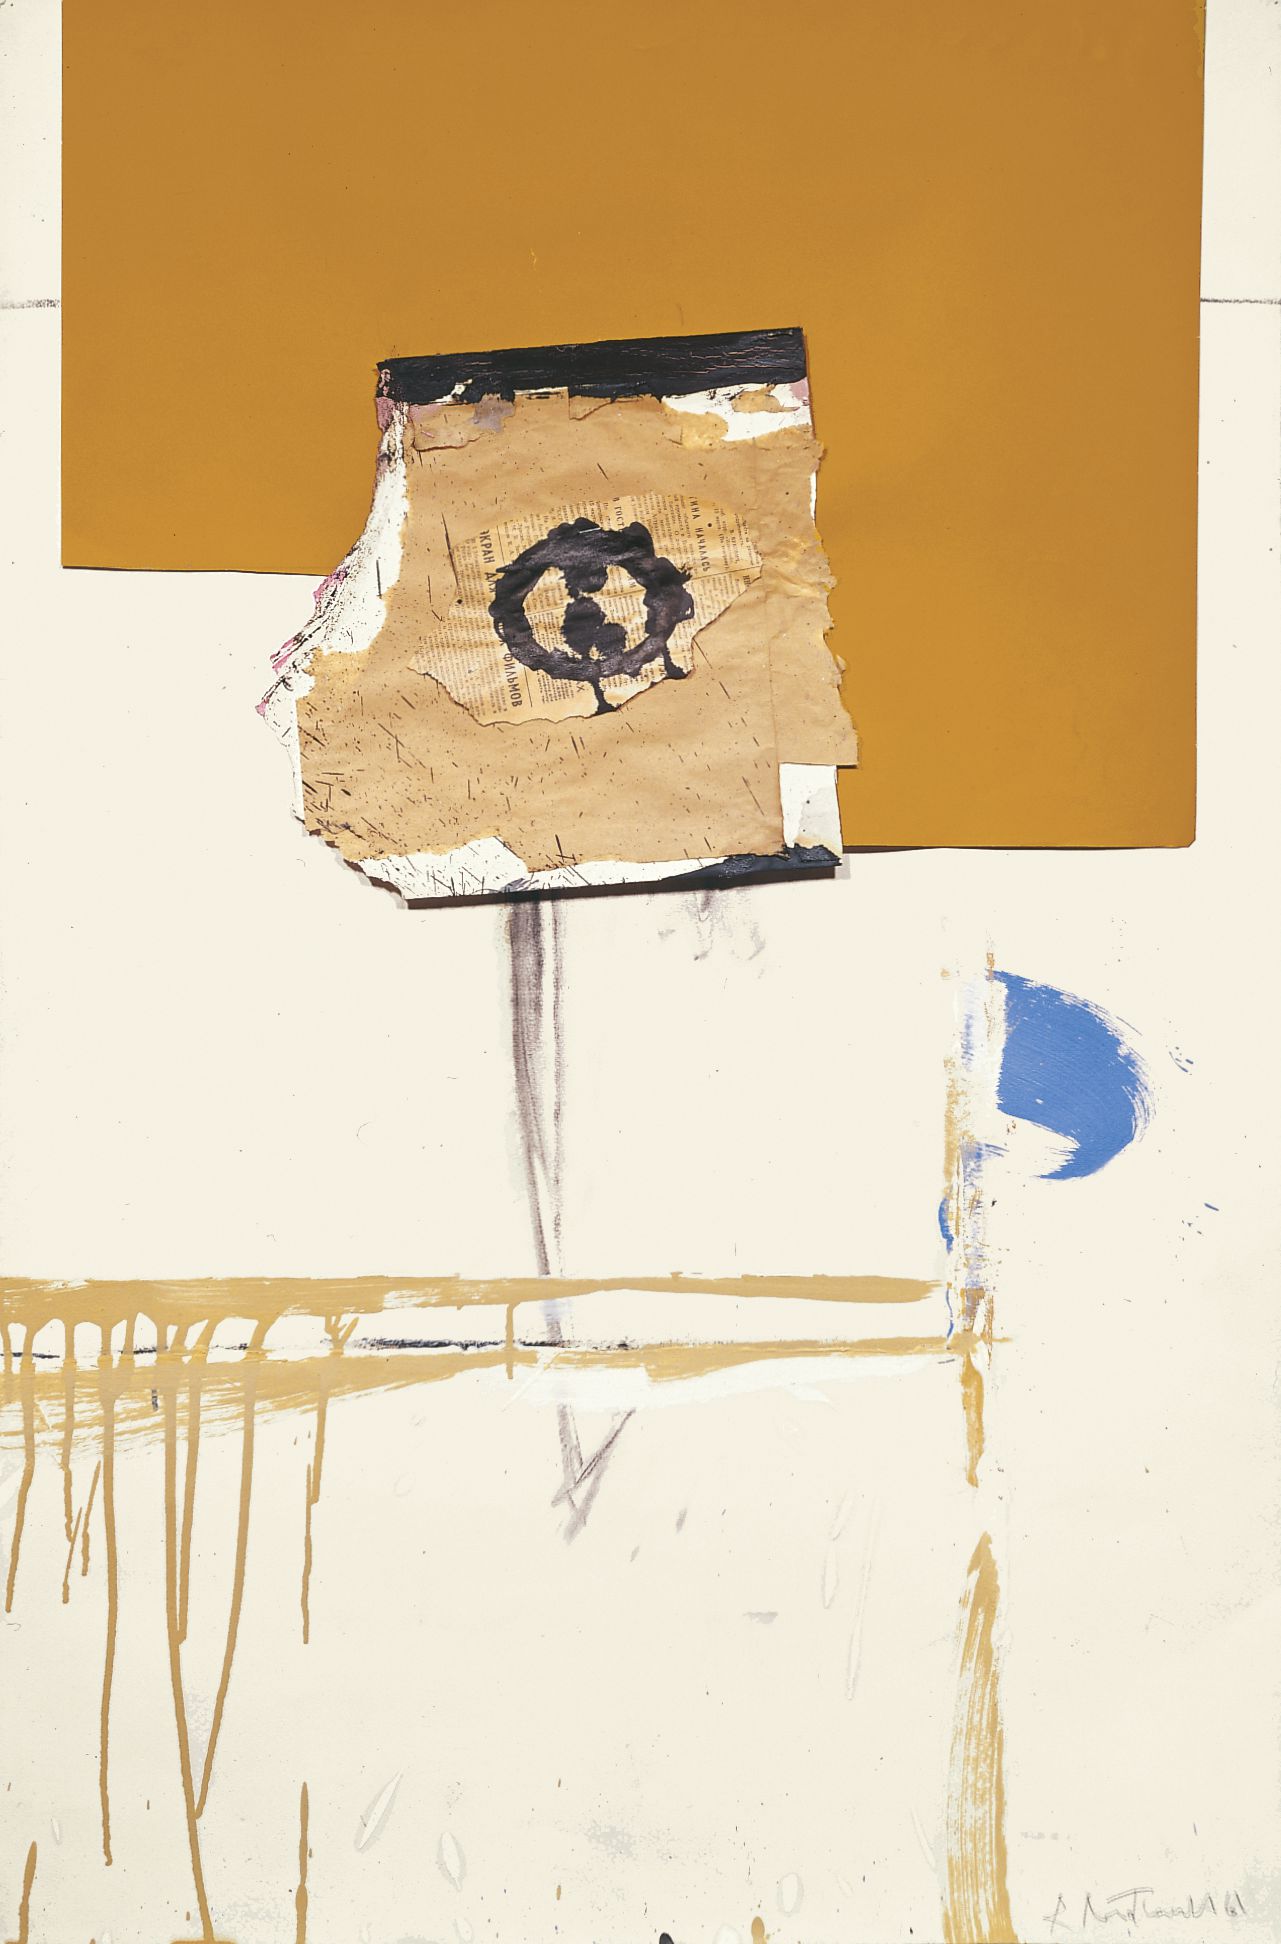 In White and Yellow Ochre, 1961. Oil, tempera, pasted papers, ink, and charcoal on paper, 40 7/8 x 27 inches (103.8 x 68.6 cm)